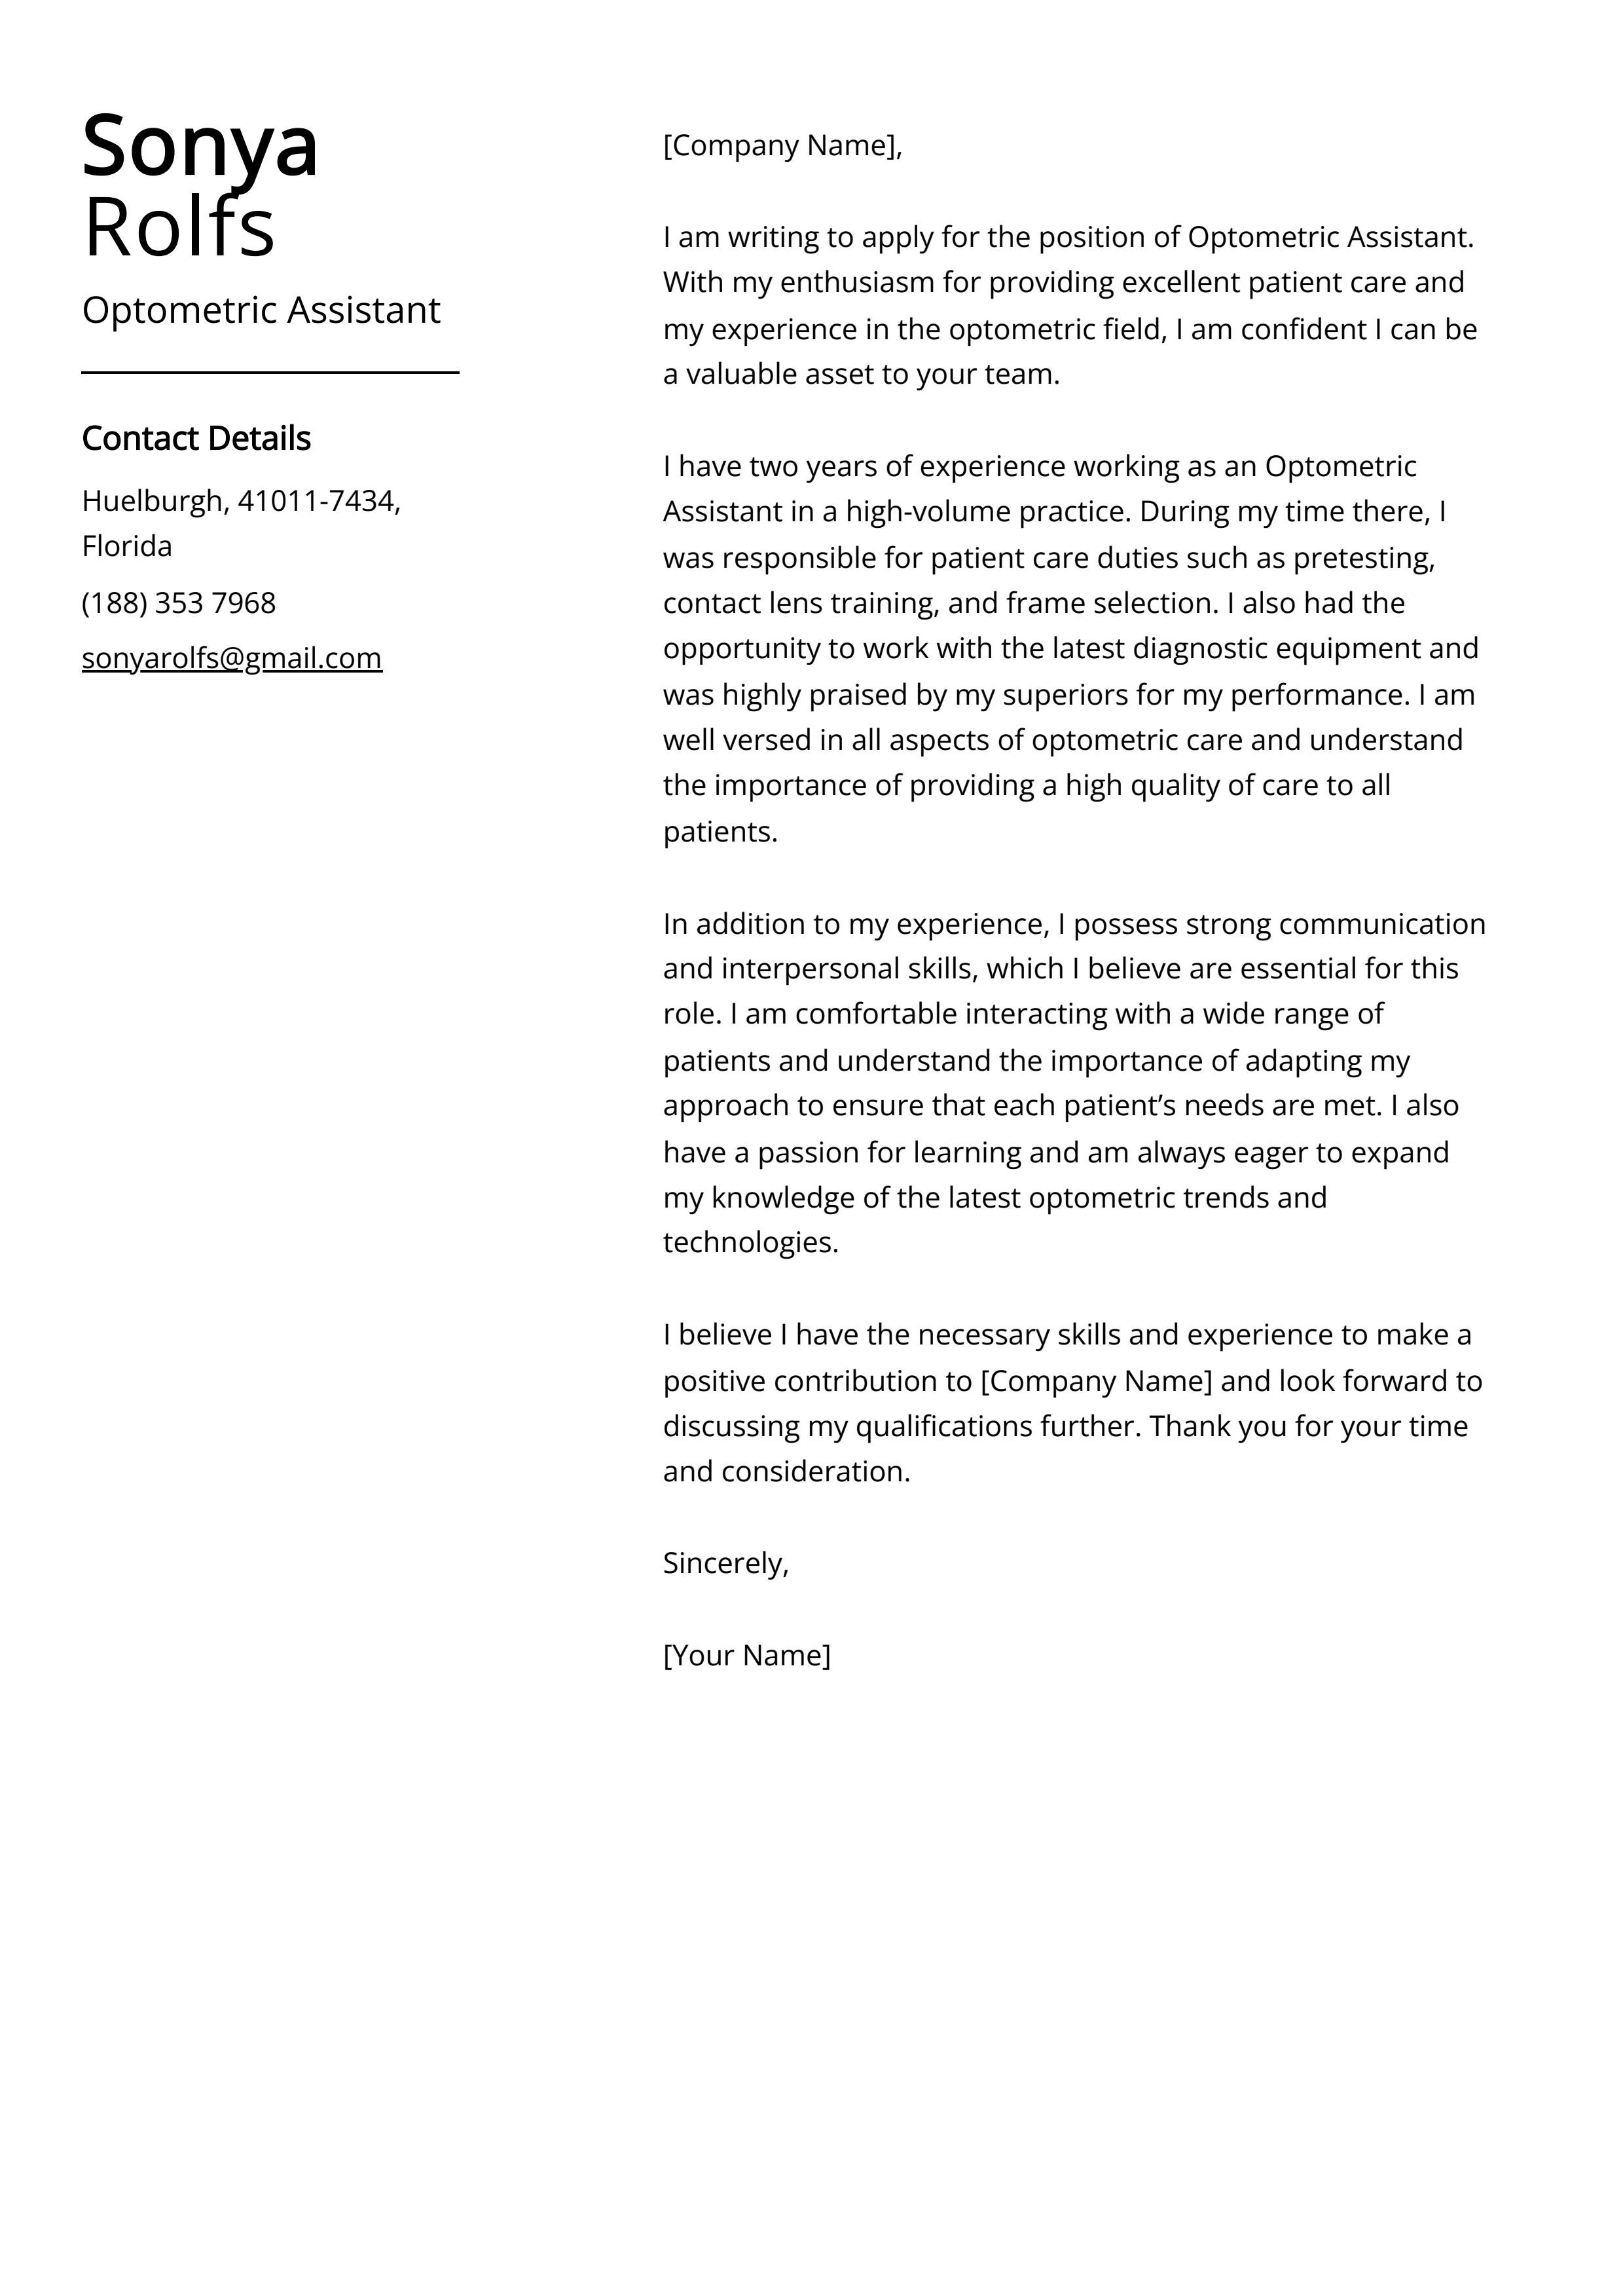 Optometric Assistant Cover Letter Example